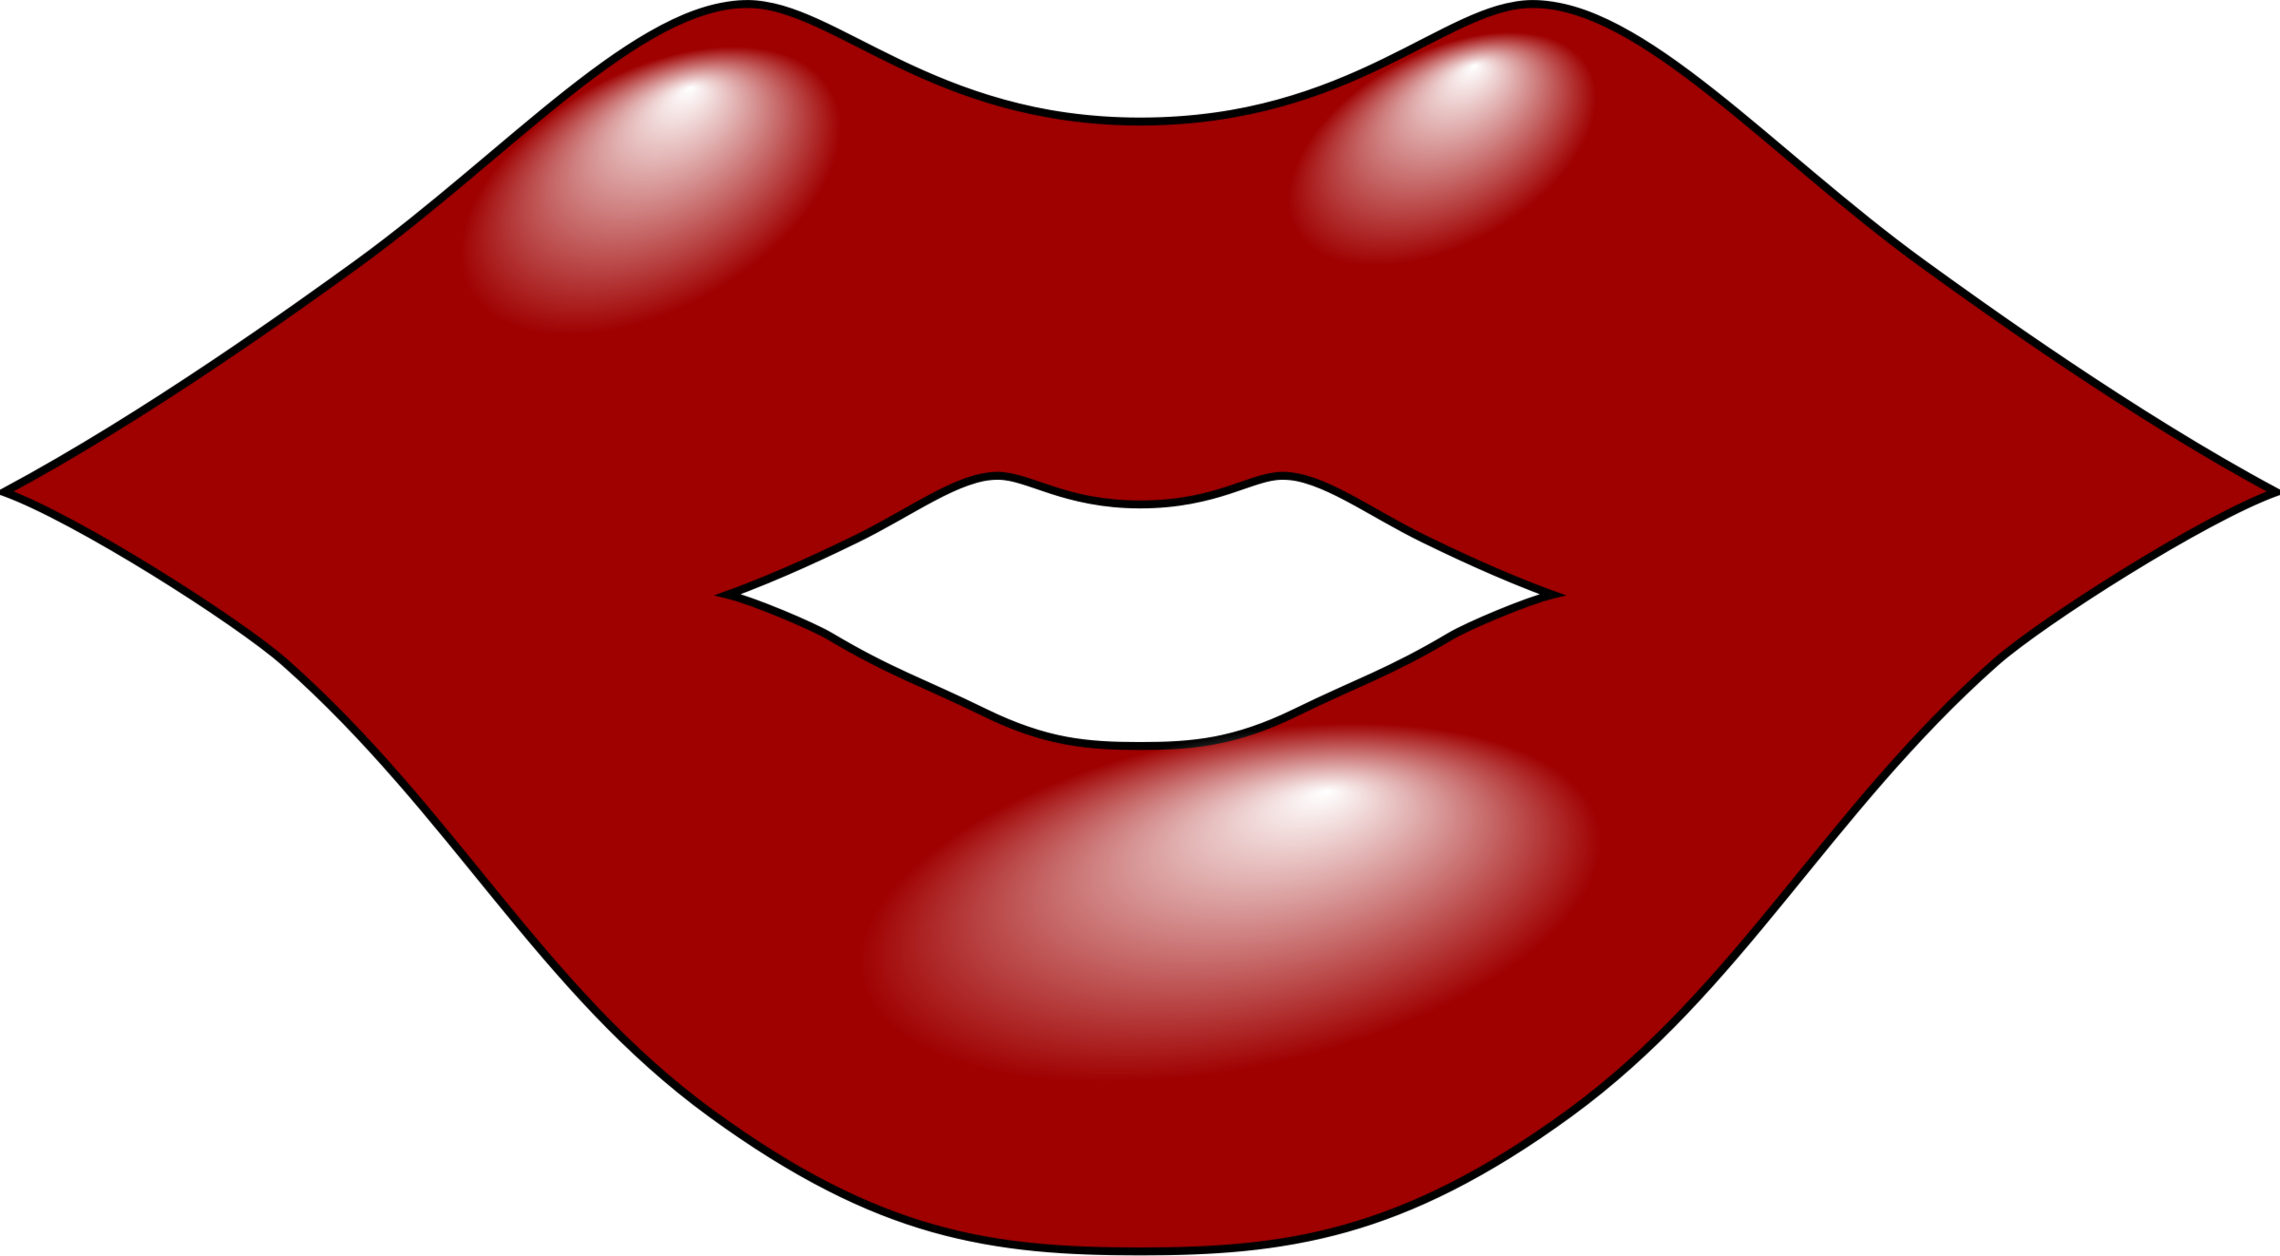 Mouth Closed Lips Image Png Clipart